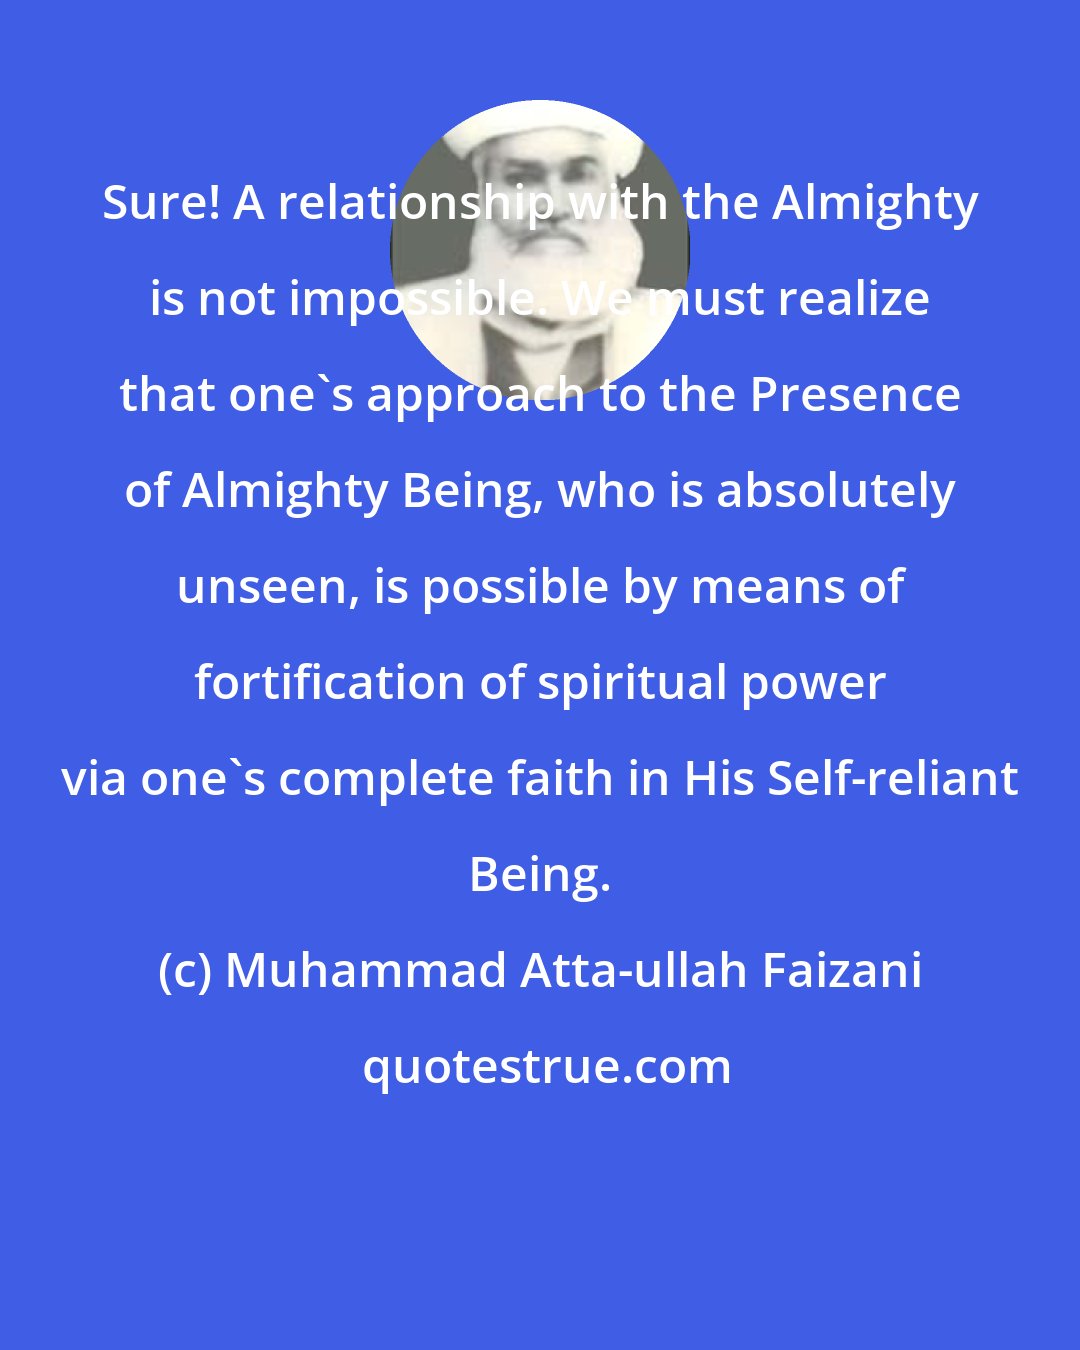 Muhammad Atta-ullah Faizani: Sure! A relationship with the Almighty is not impossible. We must realize that one's approach to the Presence of Almighty Being, who is absolutely unseen, is possible by means of fortification of spiritual power via one's complete faith in His Self-reliant Being.